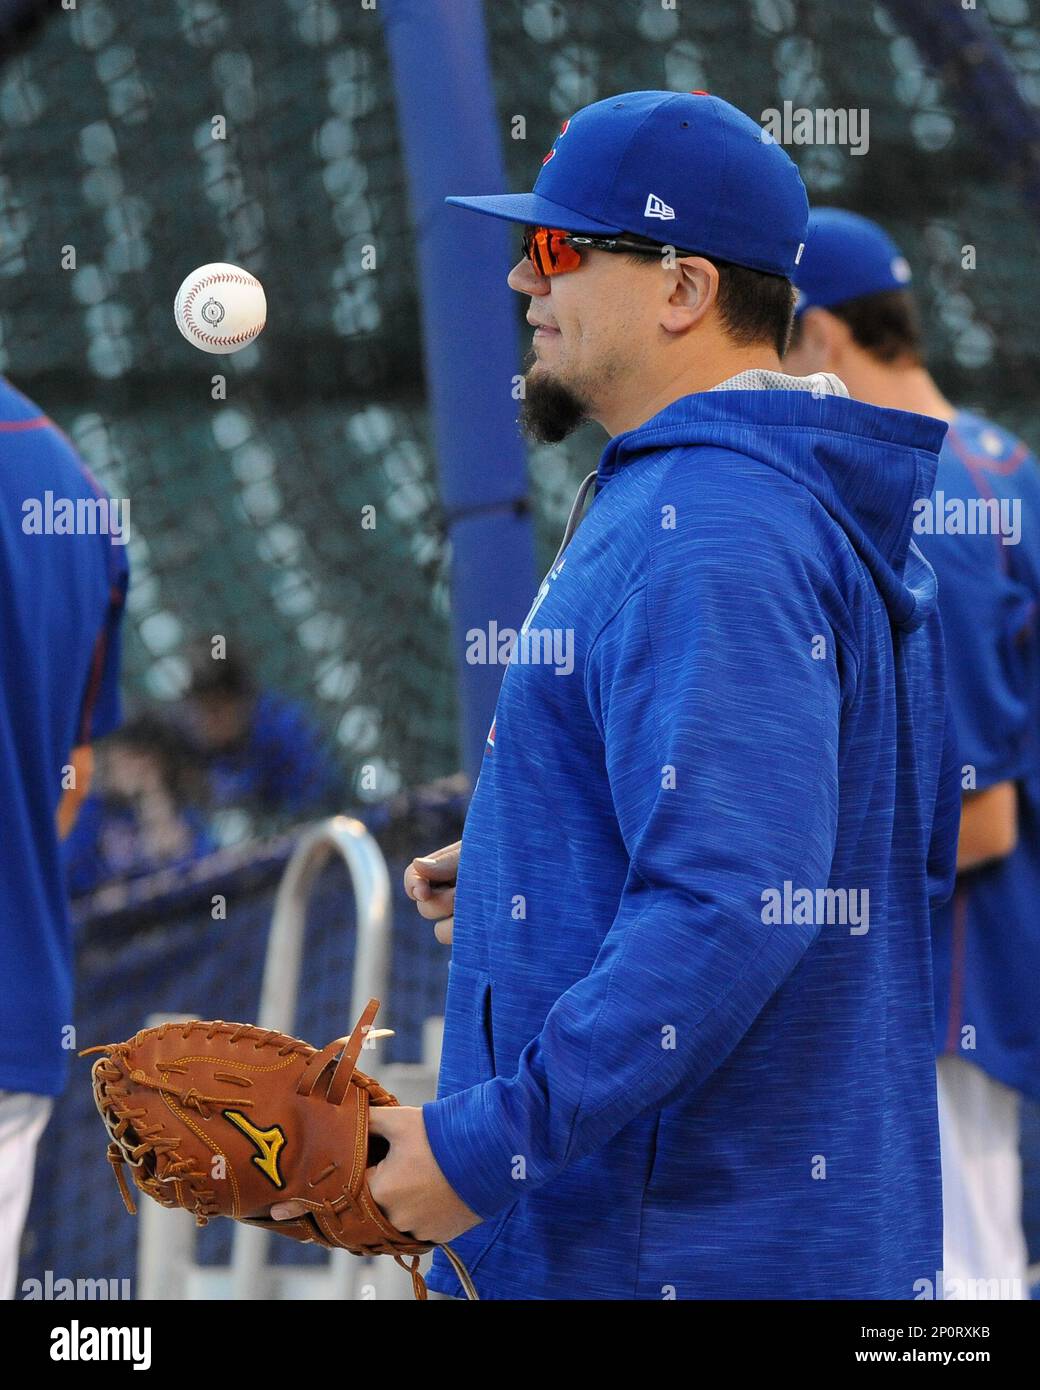 Chicago Cubs third baseman Javier Baez smiles before game 2 of the National  League Championship Series against the Los Angeles Dodgers at Wrigley Field  in Chicago on October 16, 2016. Photo by